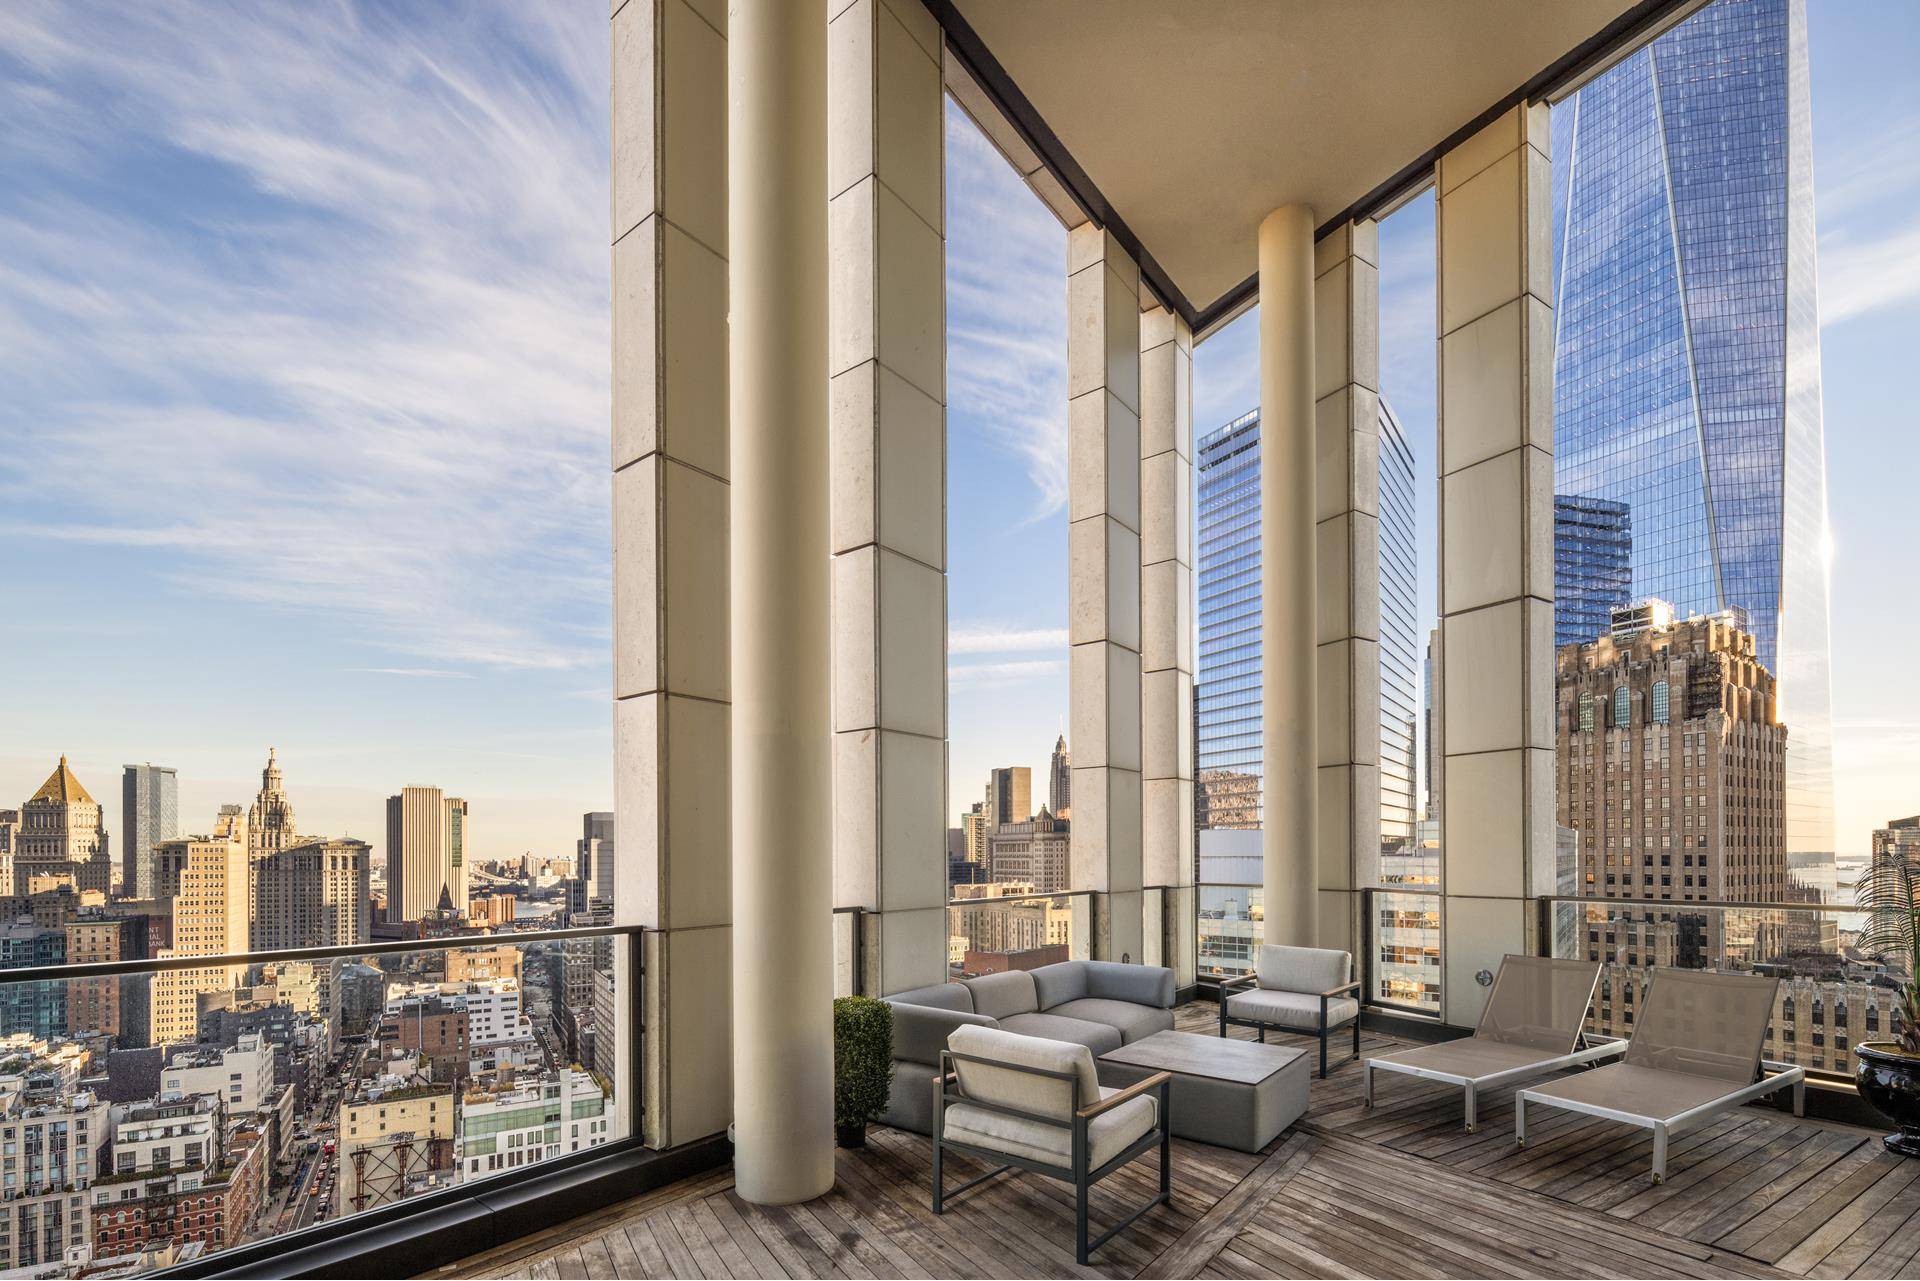 Experience New York City like never before from this penthouse style residence atop Tribeca's acclaimed 101 Warren Street.